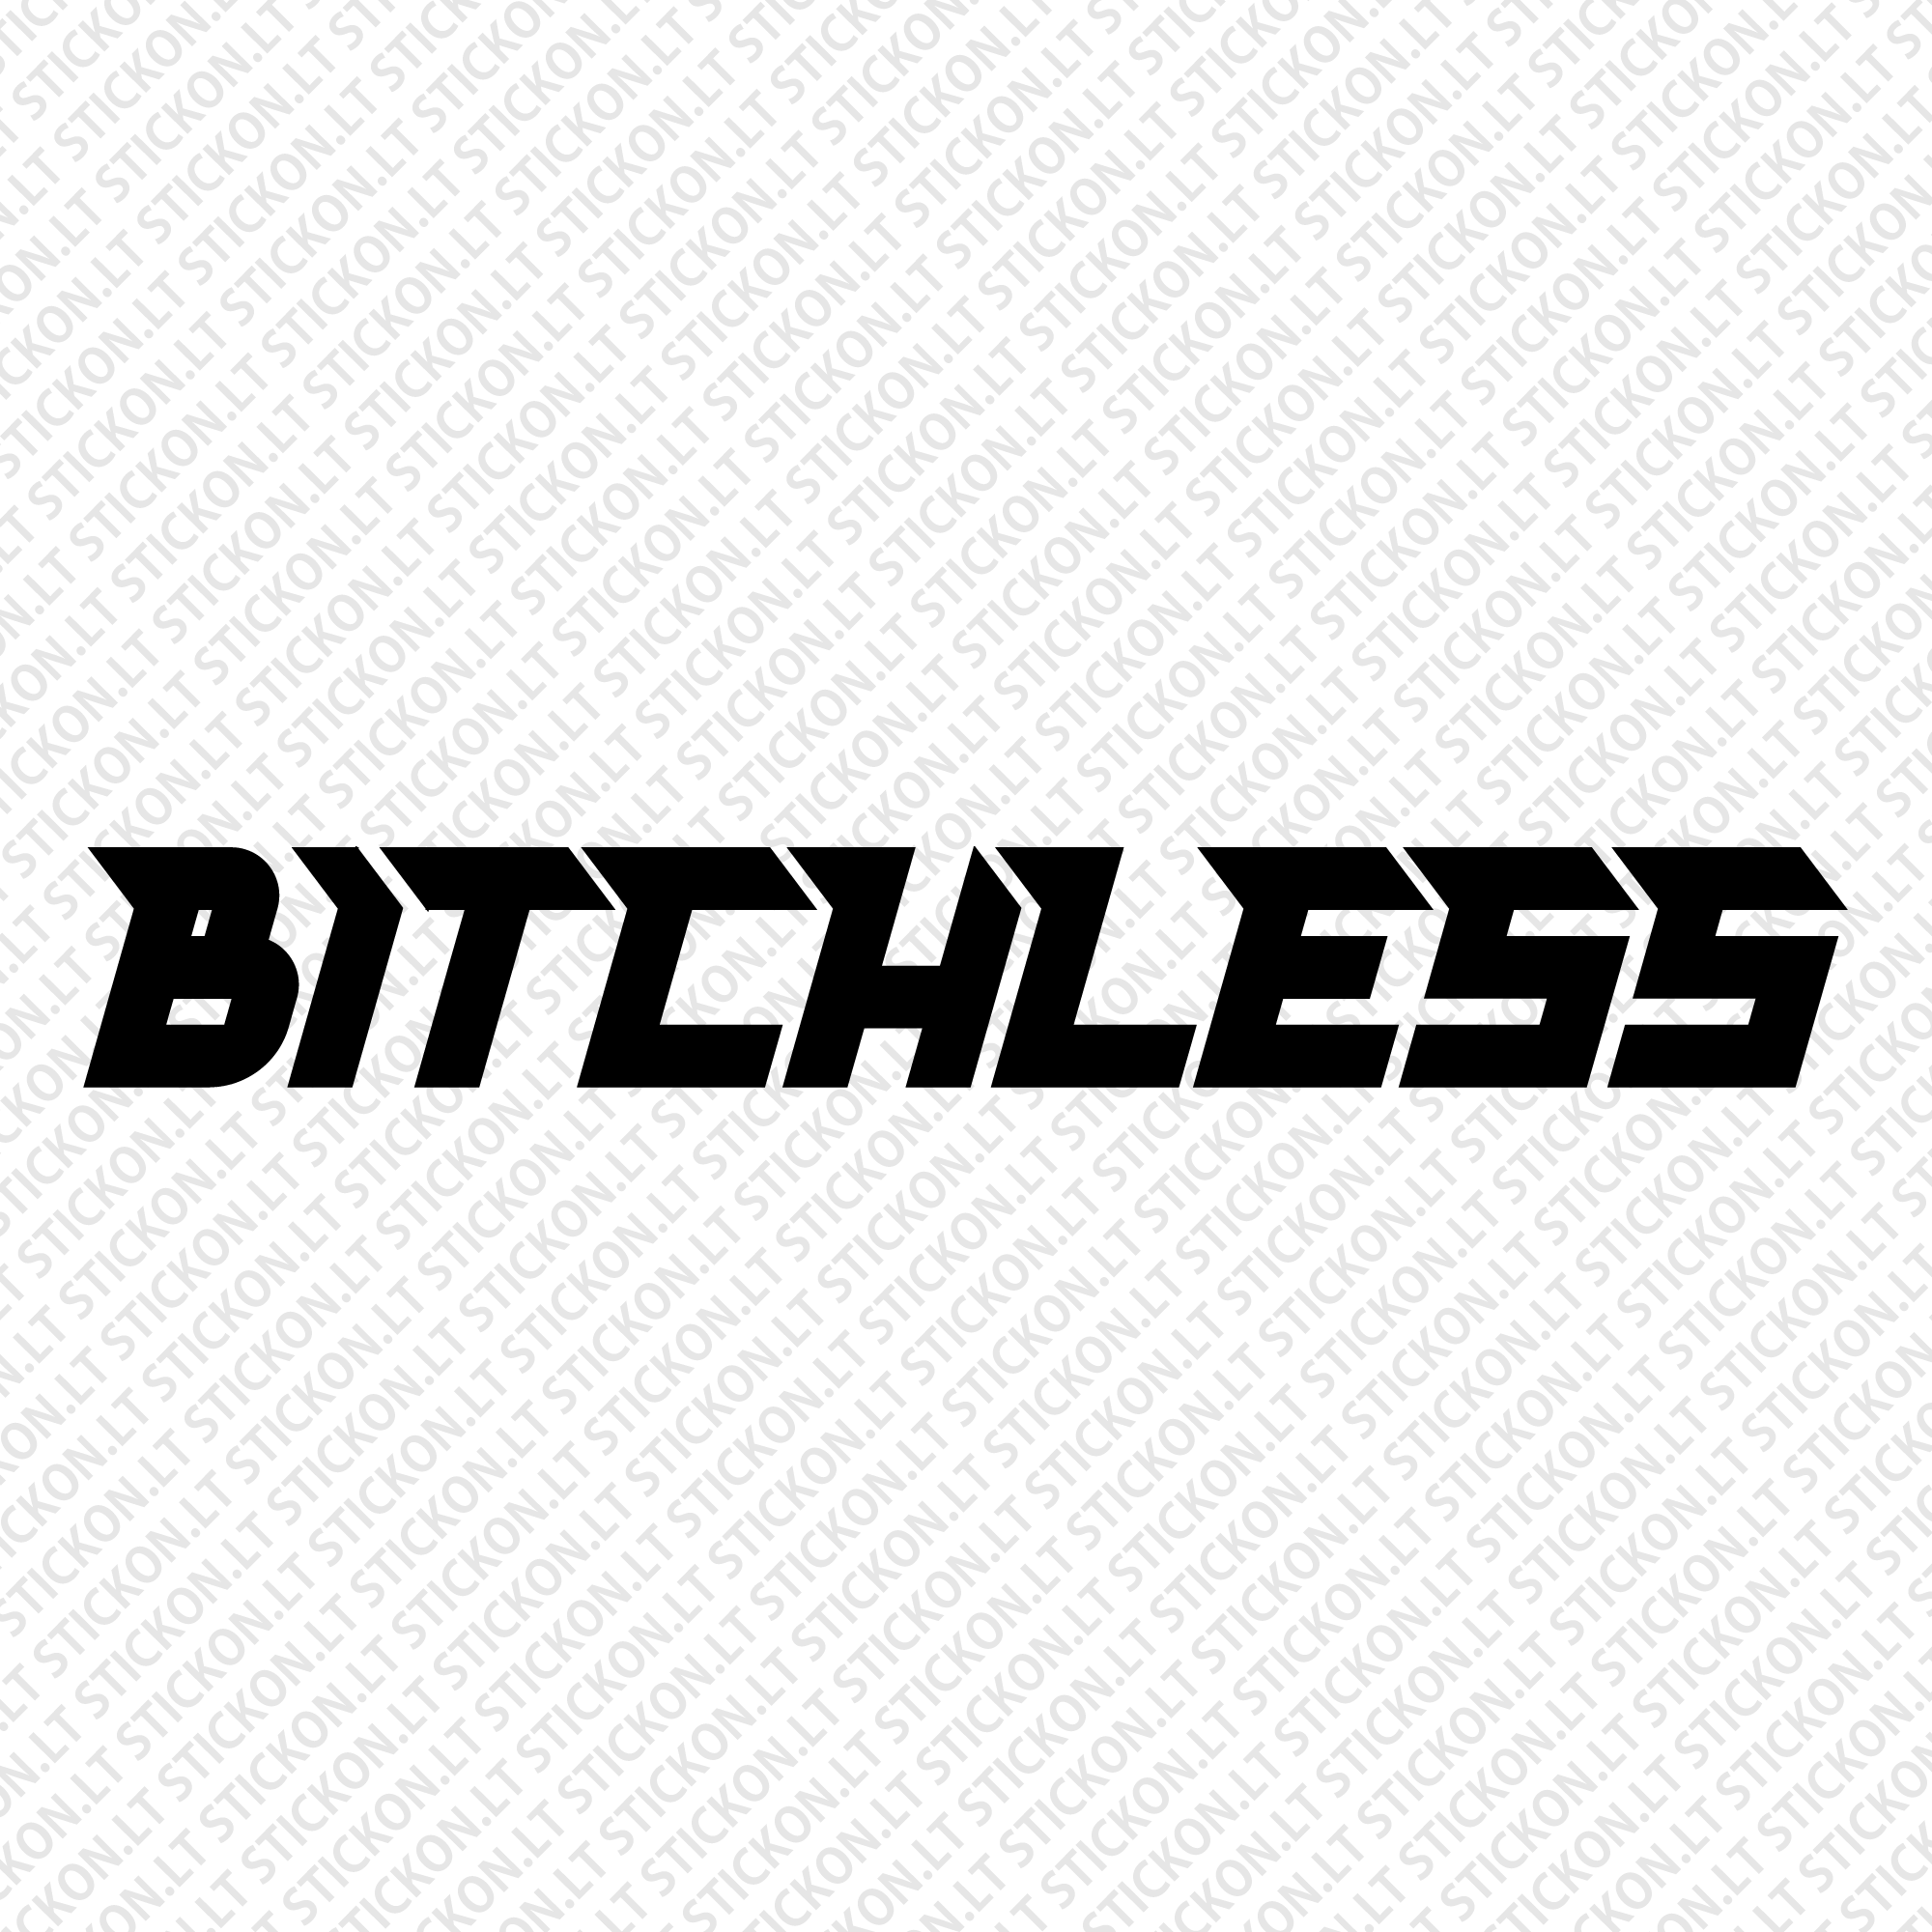 "Bitchless"